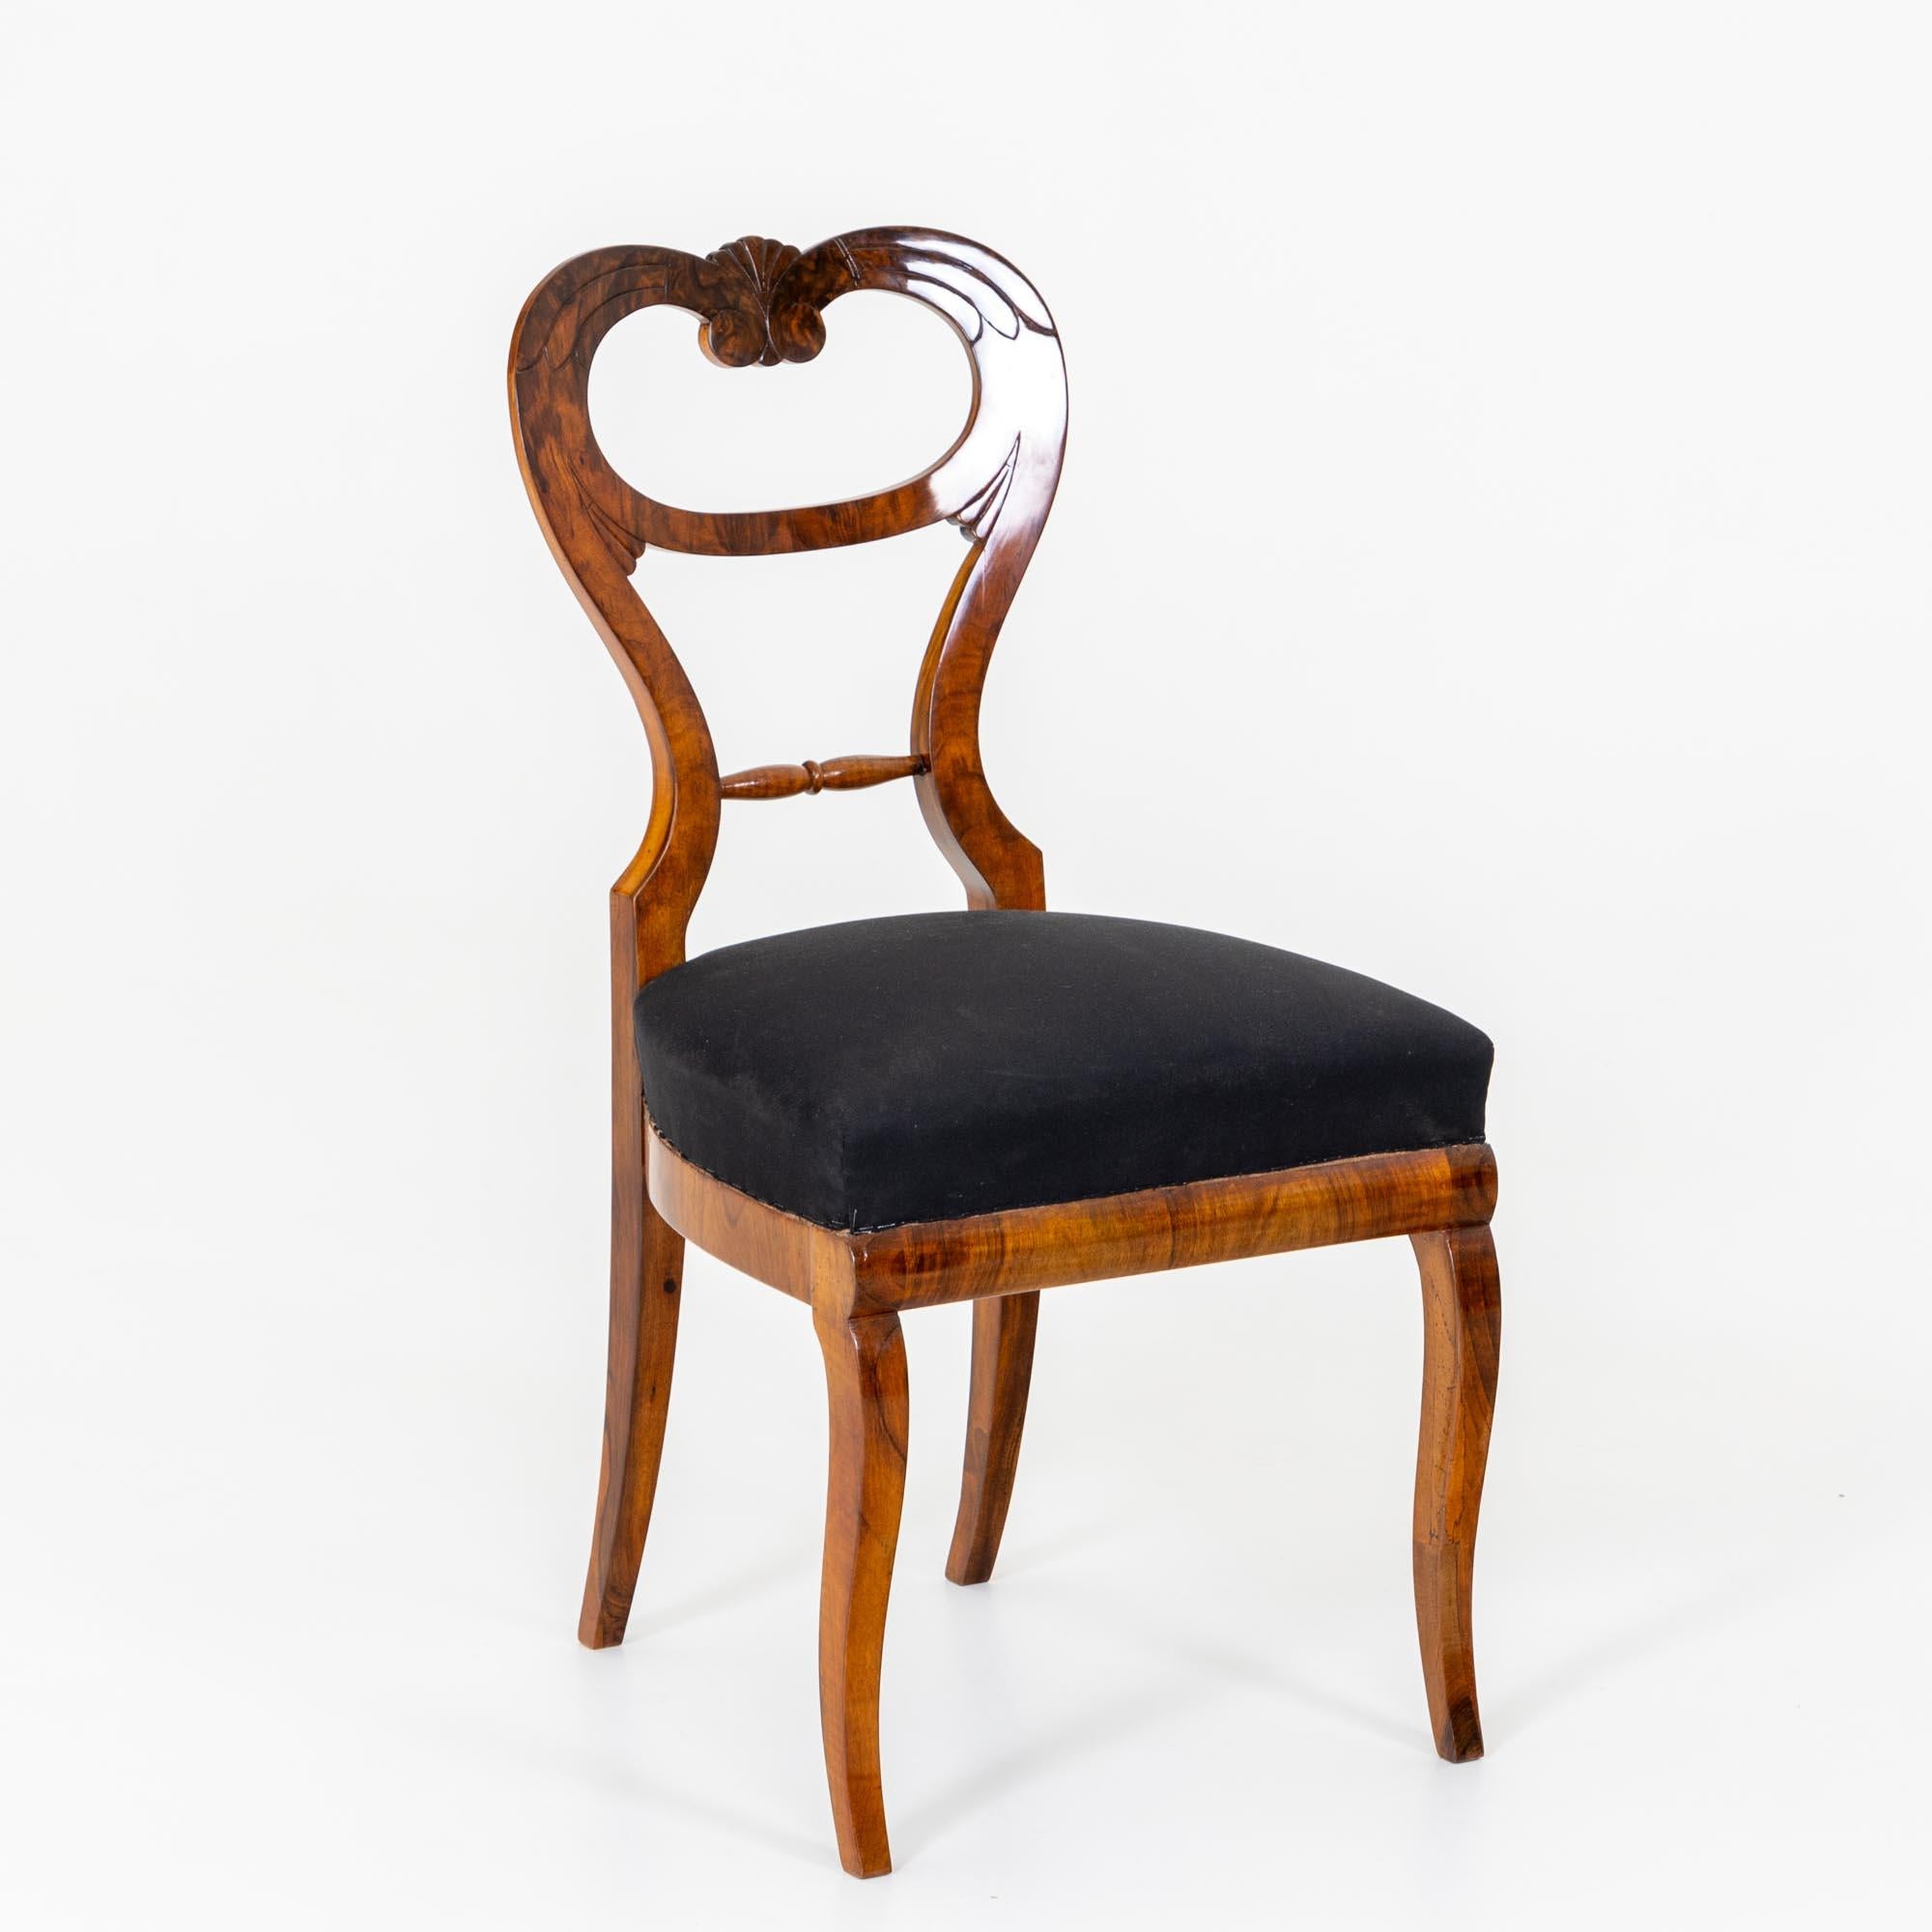 Set of six Biedermeier dining chairs in walnut, solid and veneered. The chairs stand on elegantly curved legs and have heart-shaped backs with fan decoration. The chairs have been reupholstered and covered with a black ground fabric and polished by